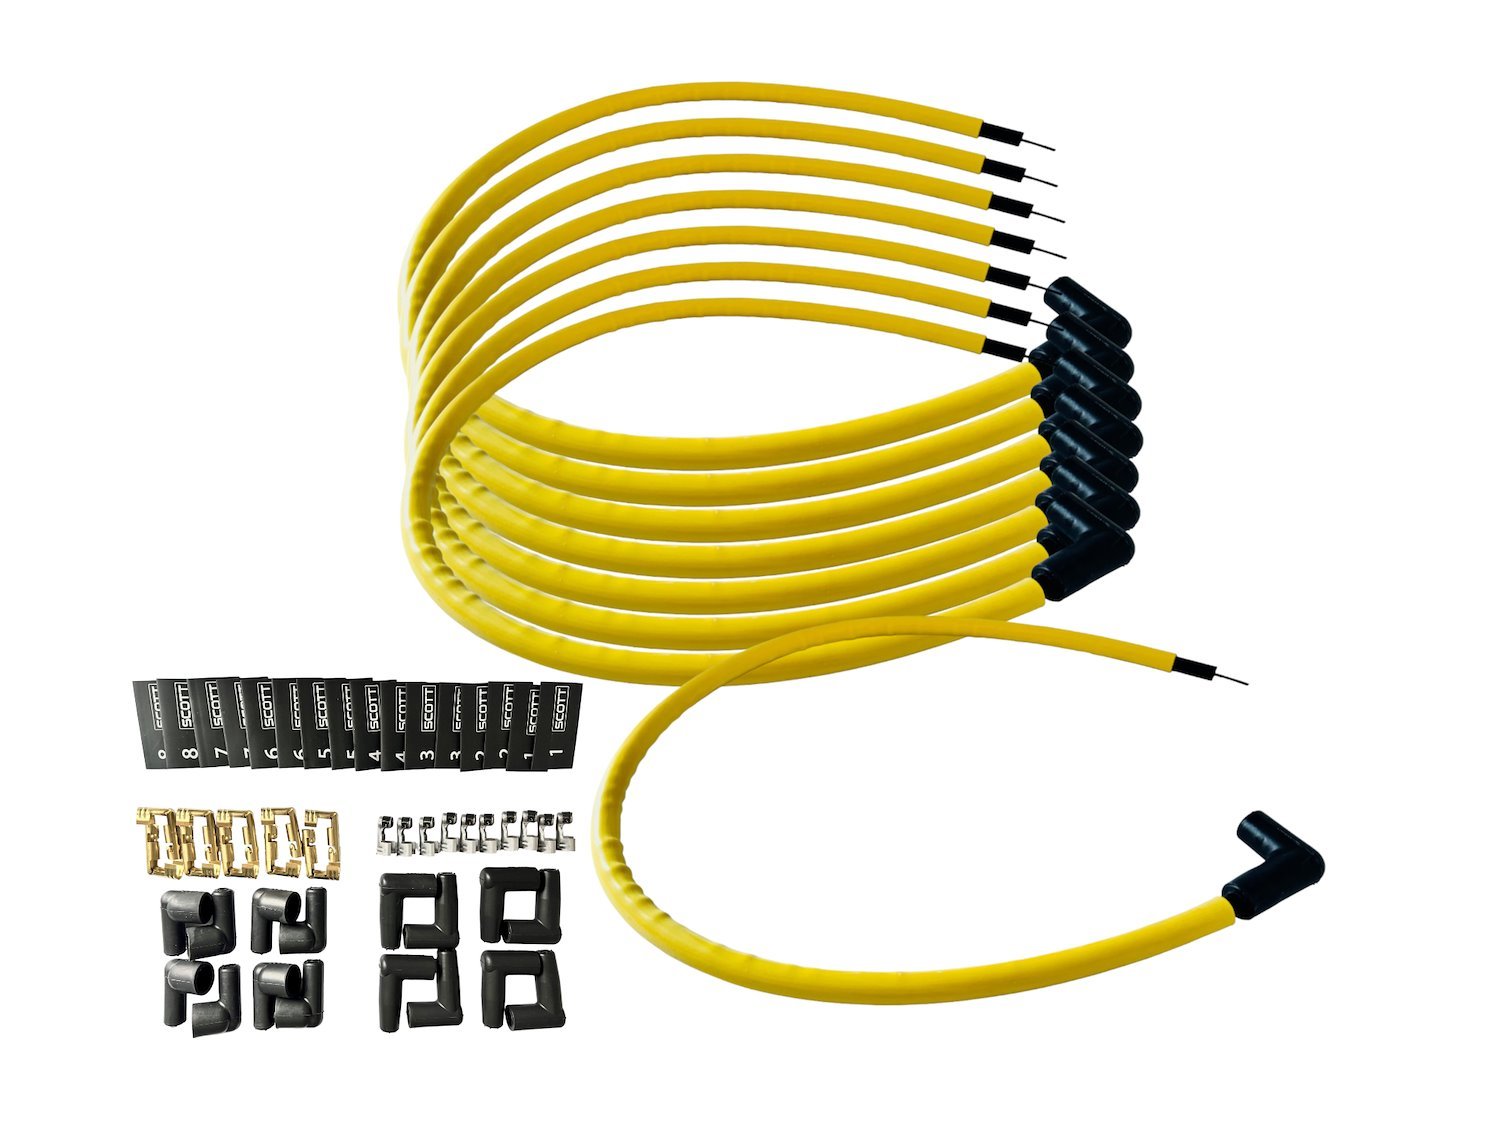 SPW300-CH-K90-7 DIY Super Mag Fiberglass-Oversleeved Spark Plug Wire Set, 90-Degree Boots [Yellow]